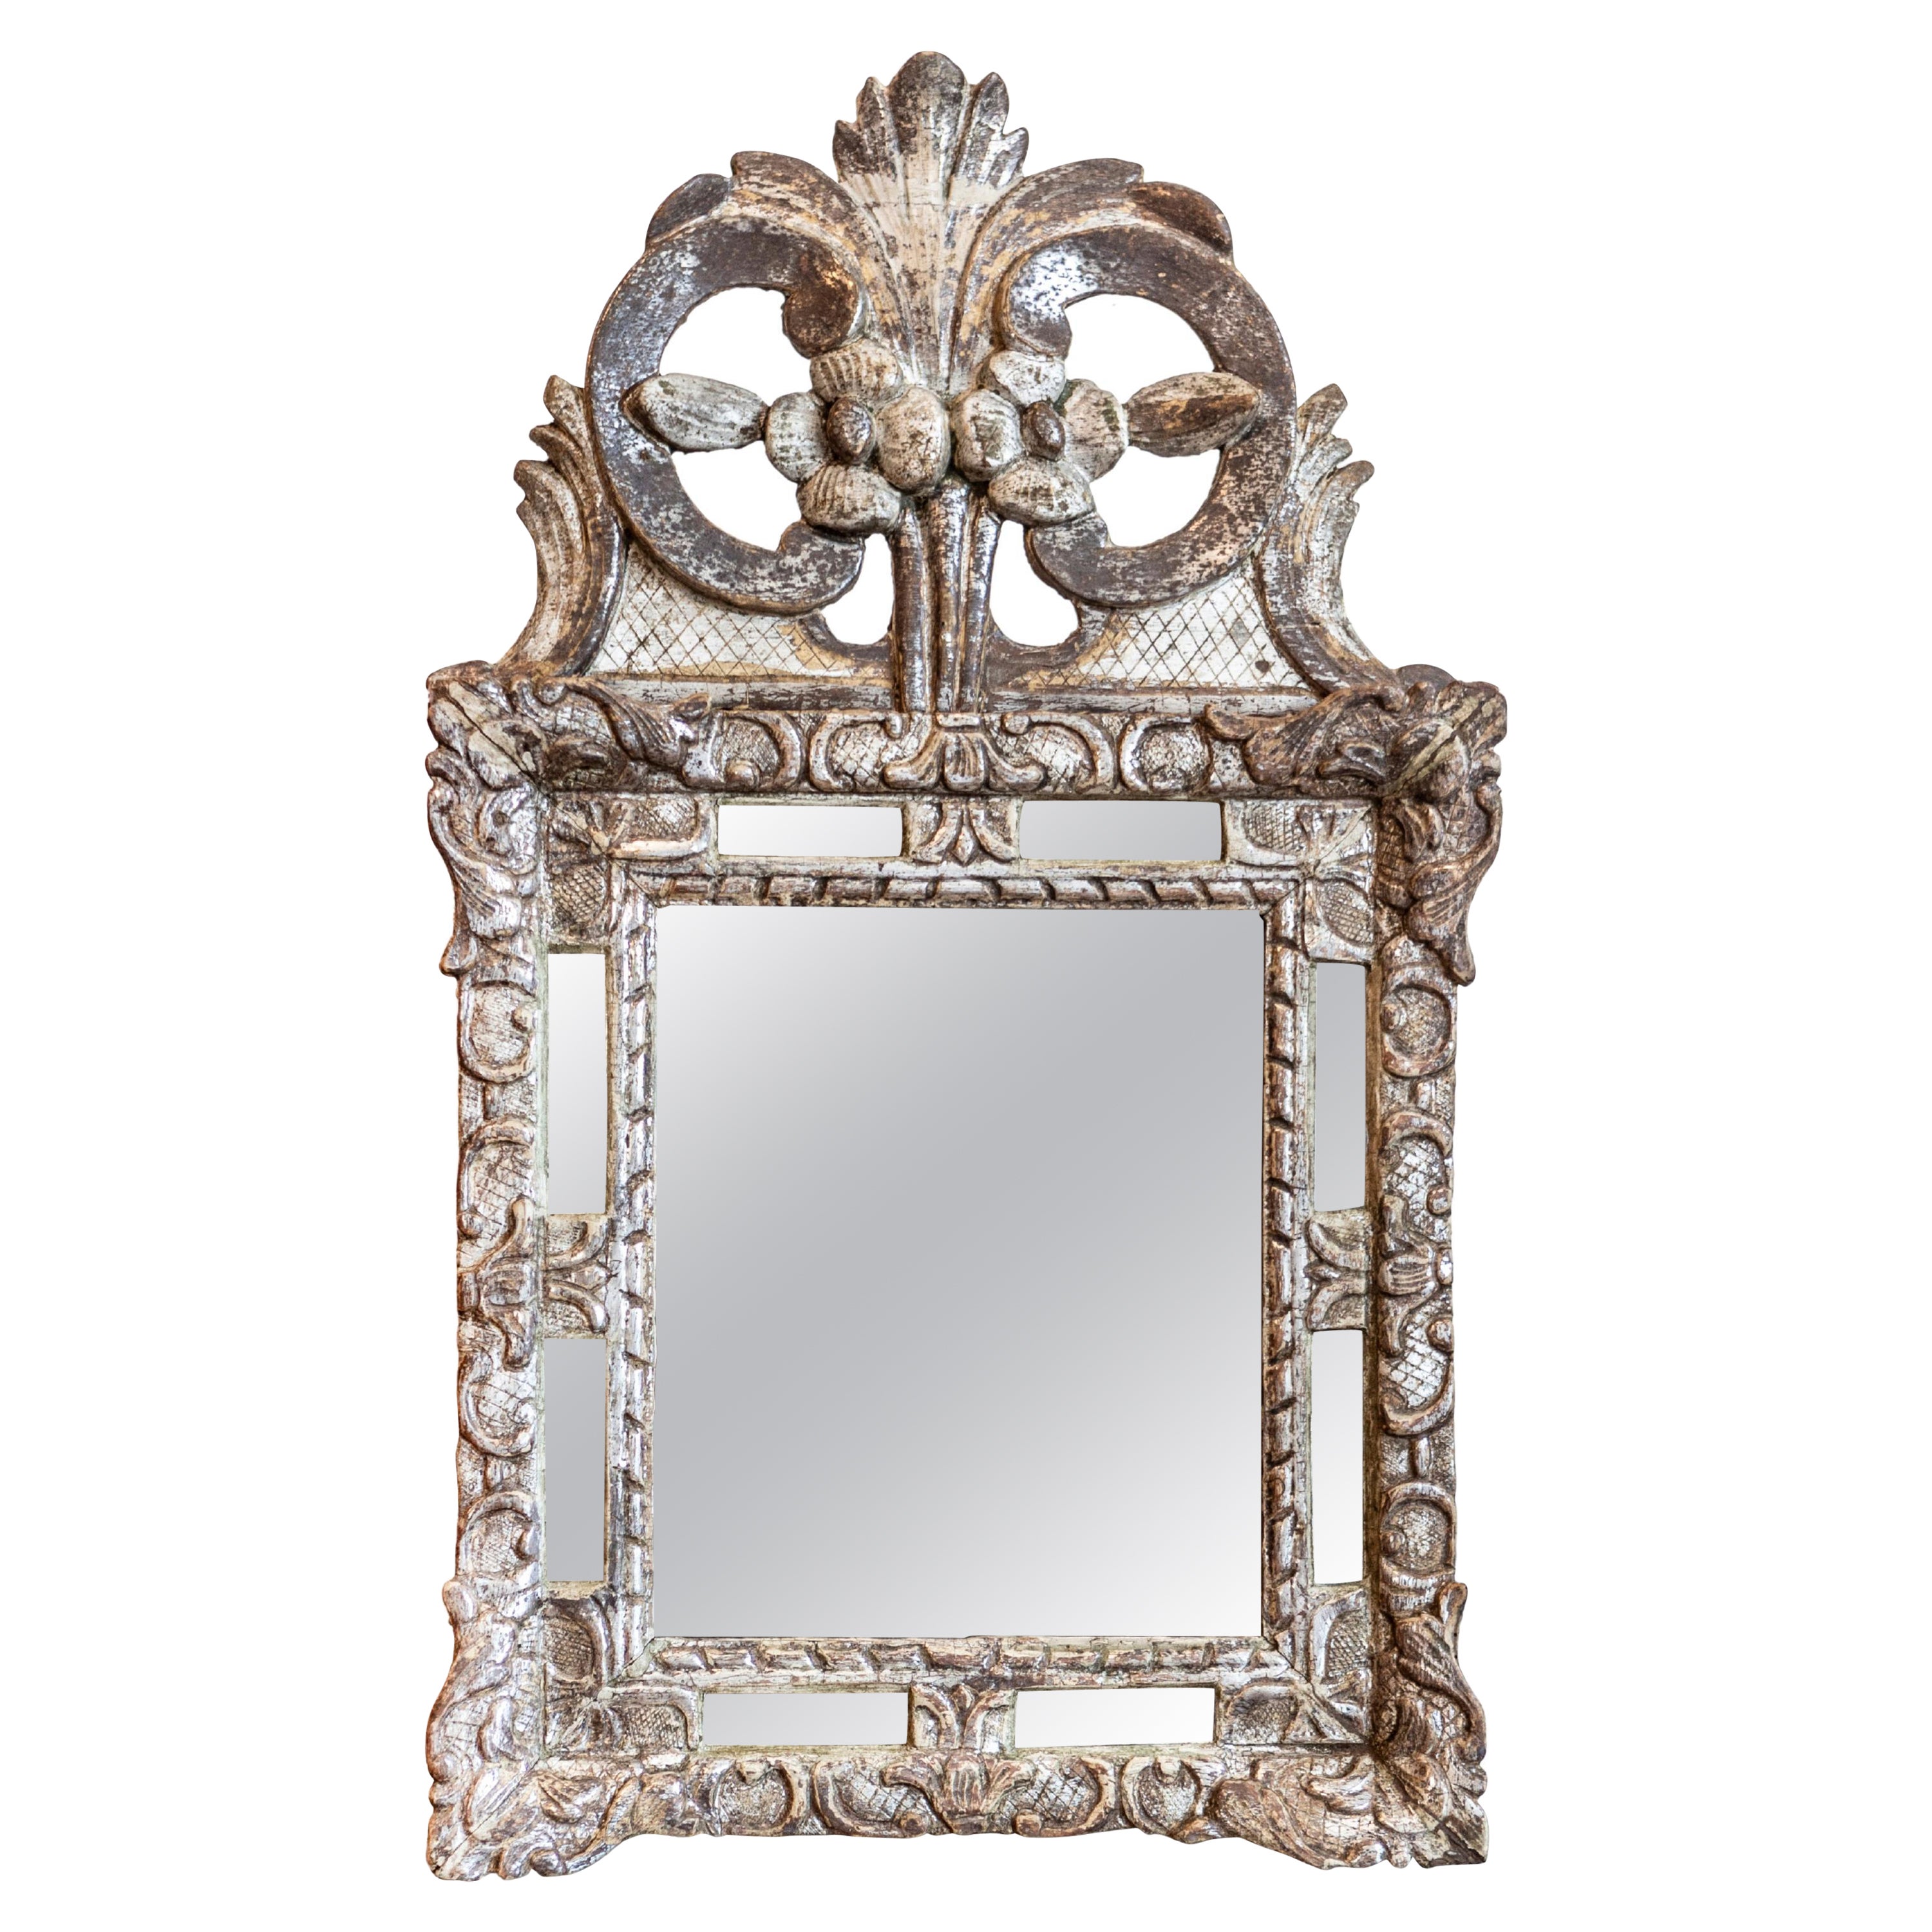 Régence 18th Century French Silver Parcel Gilt Mirror with Floral Carved Crest For Sale